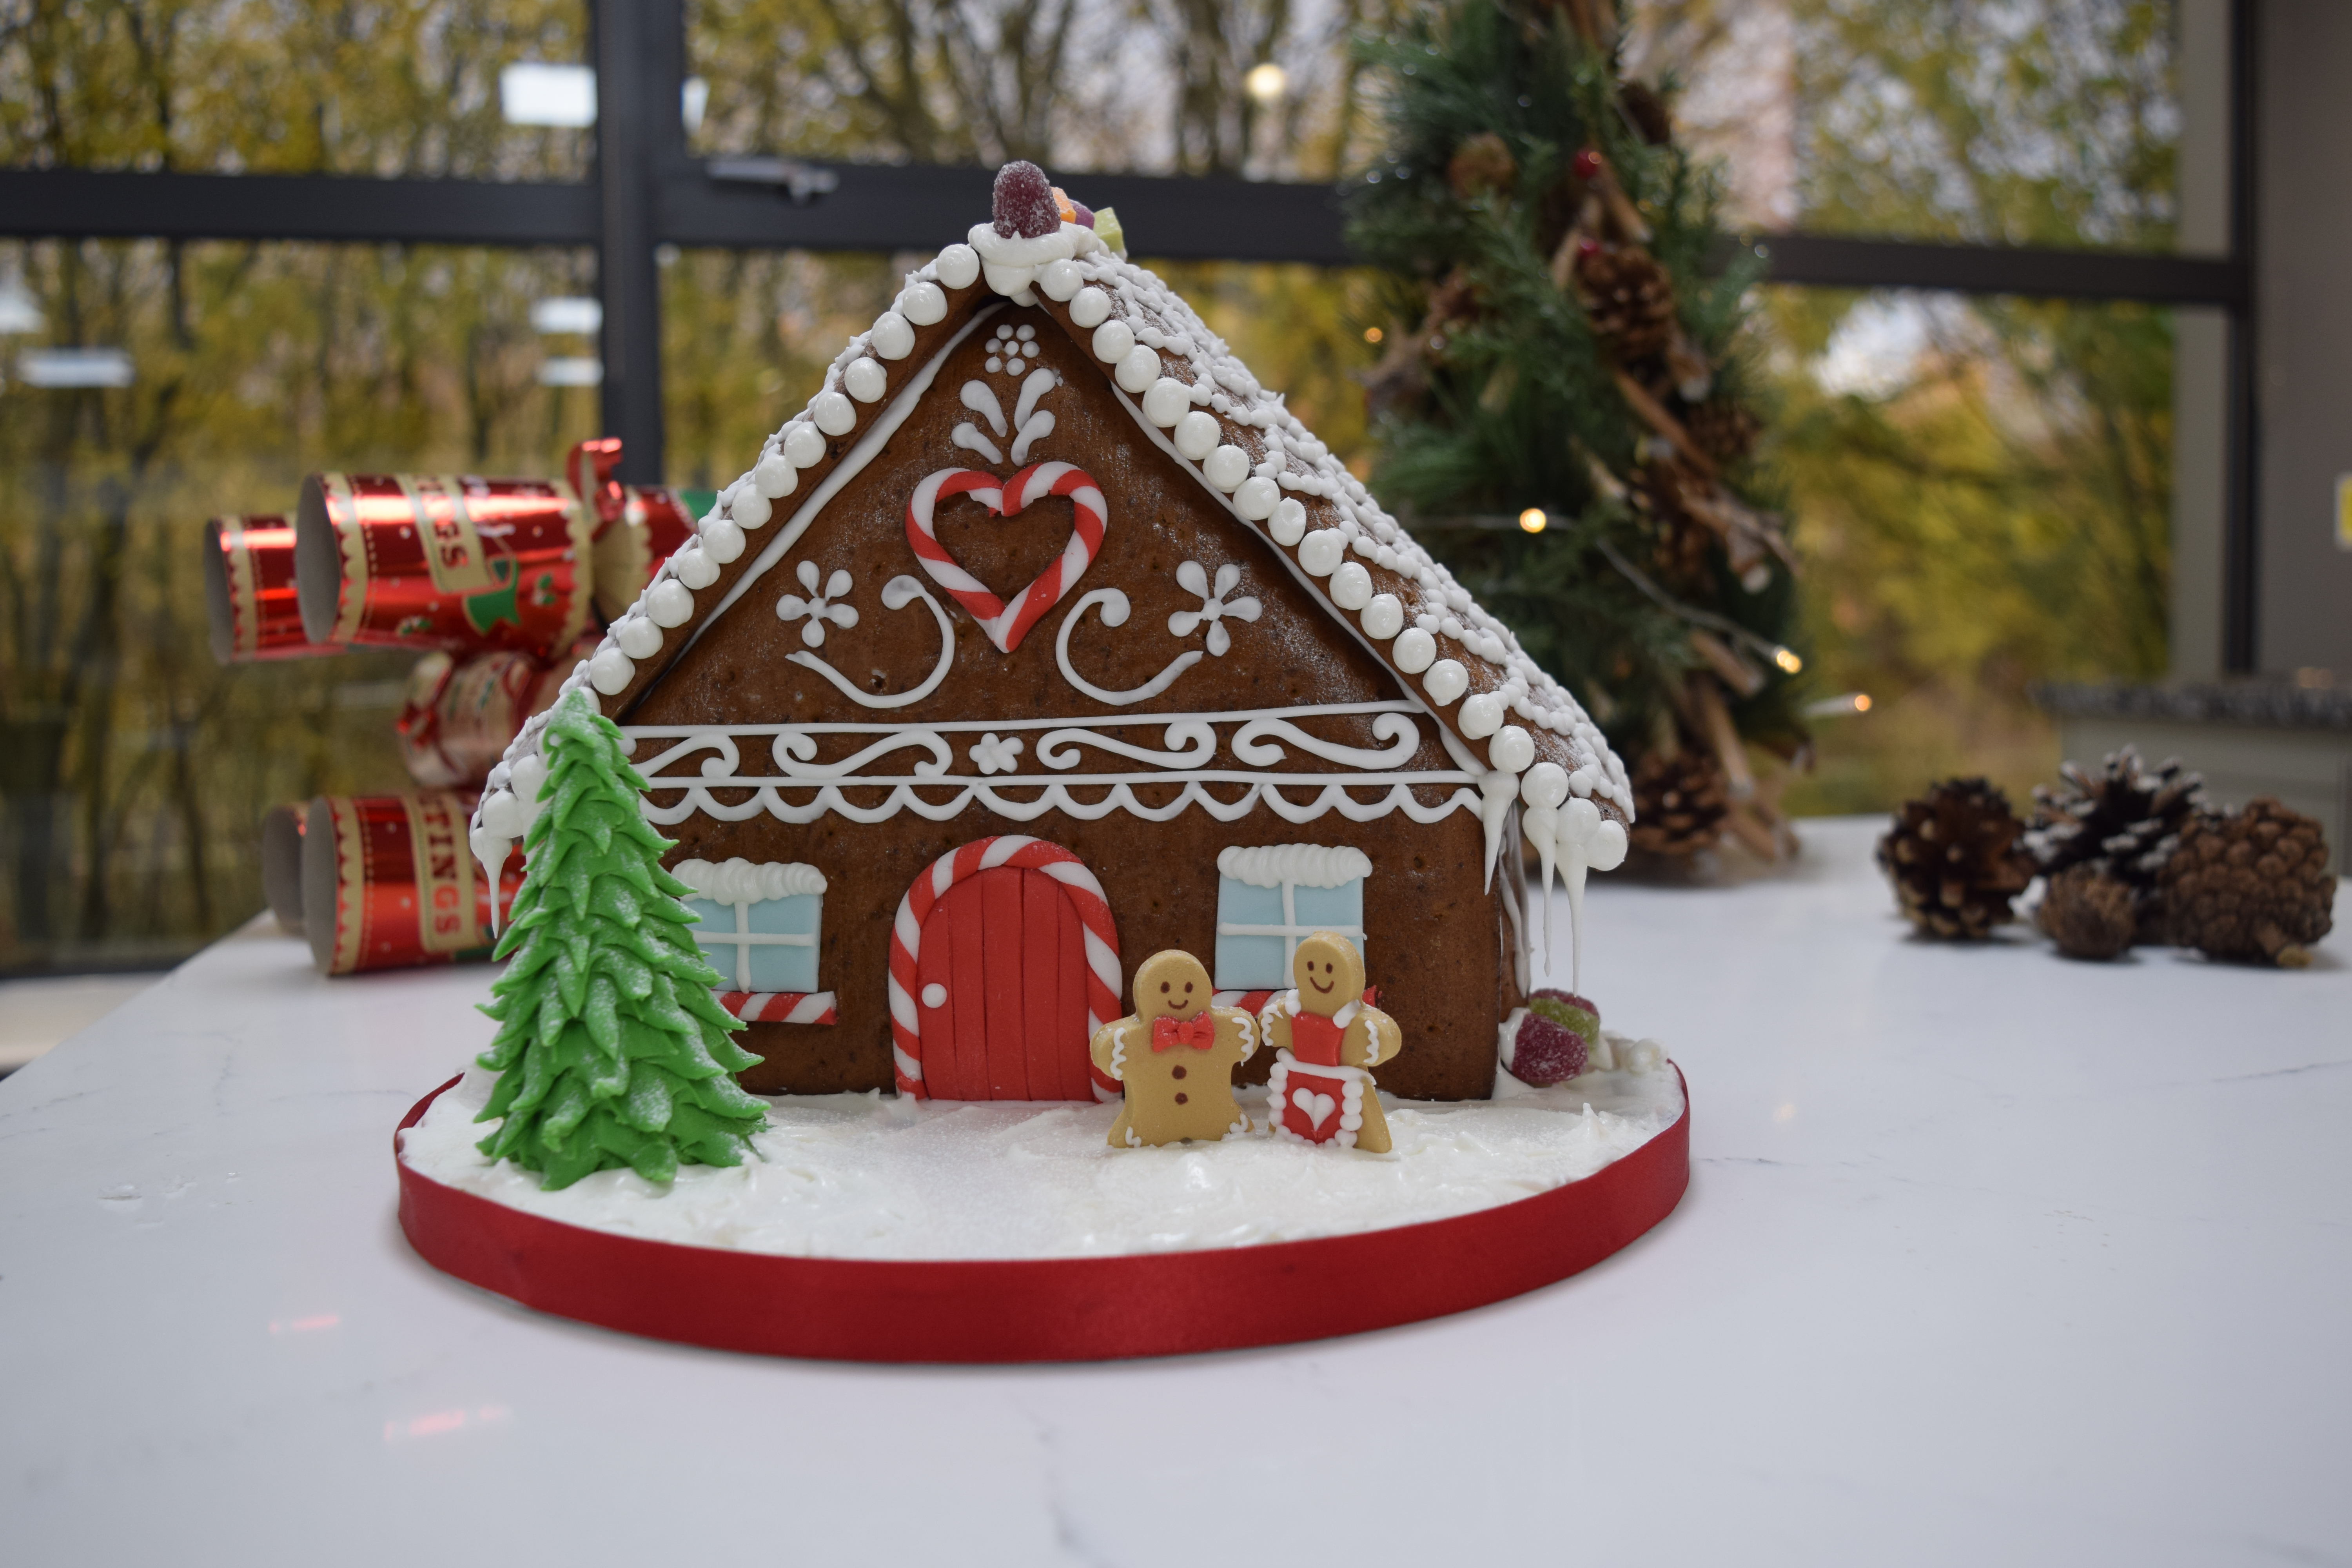 Gingerbread House with Royal Icing